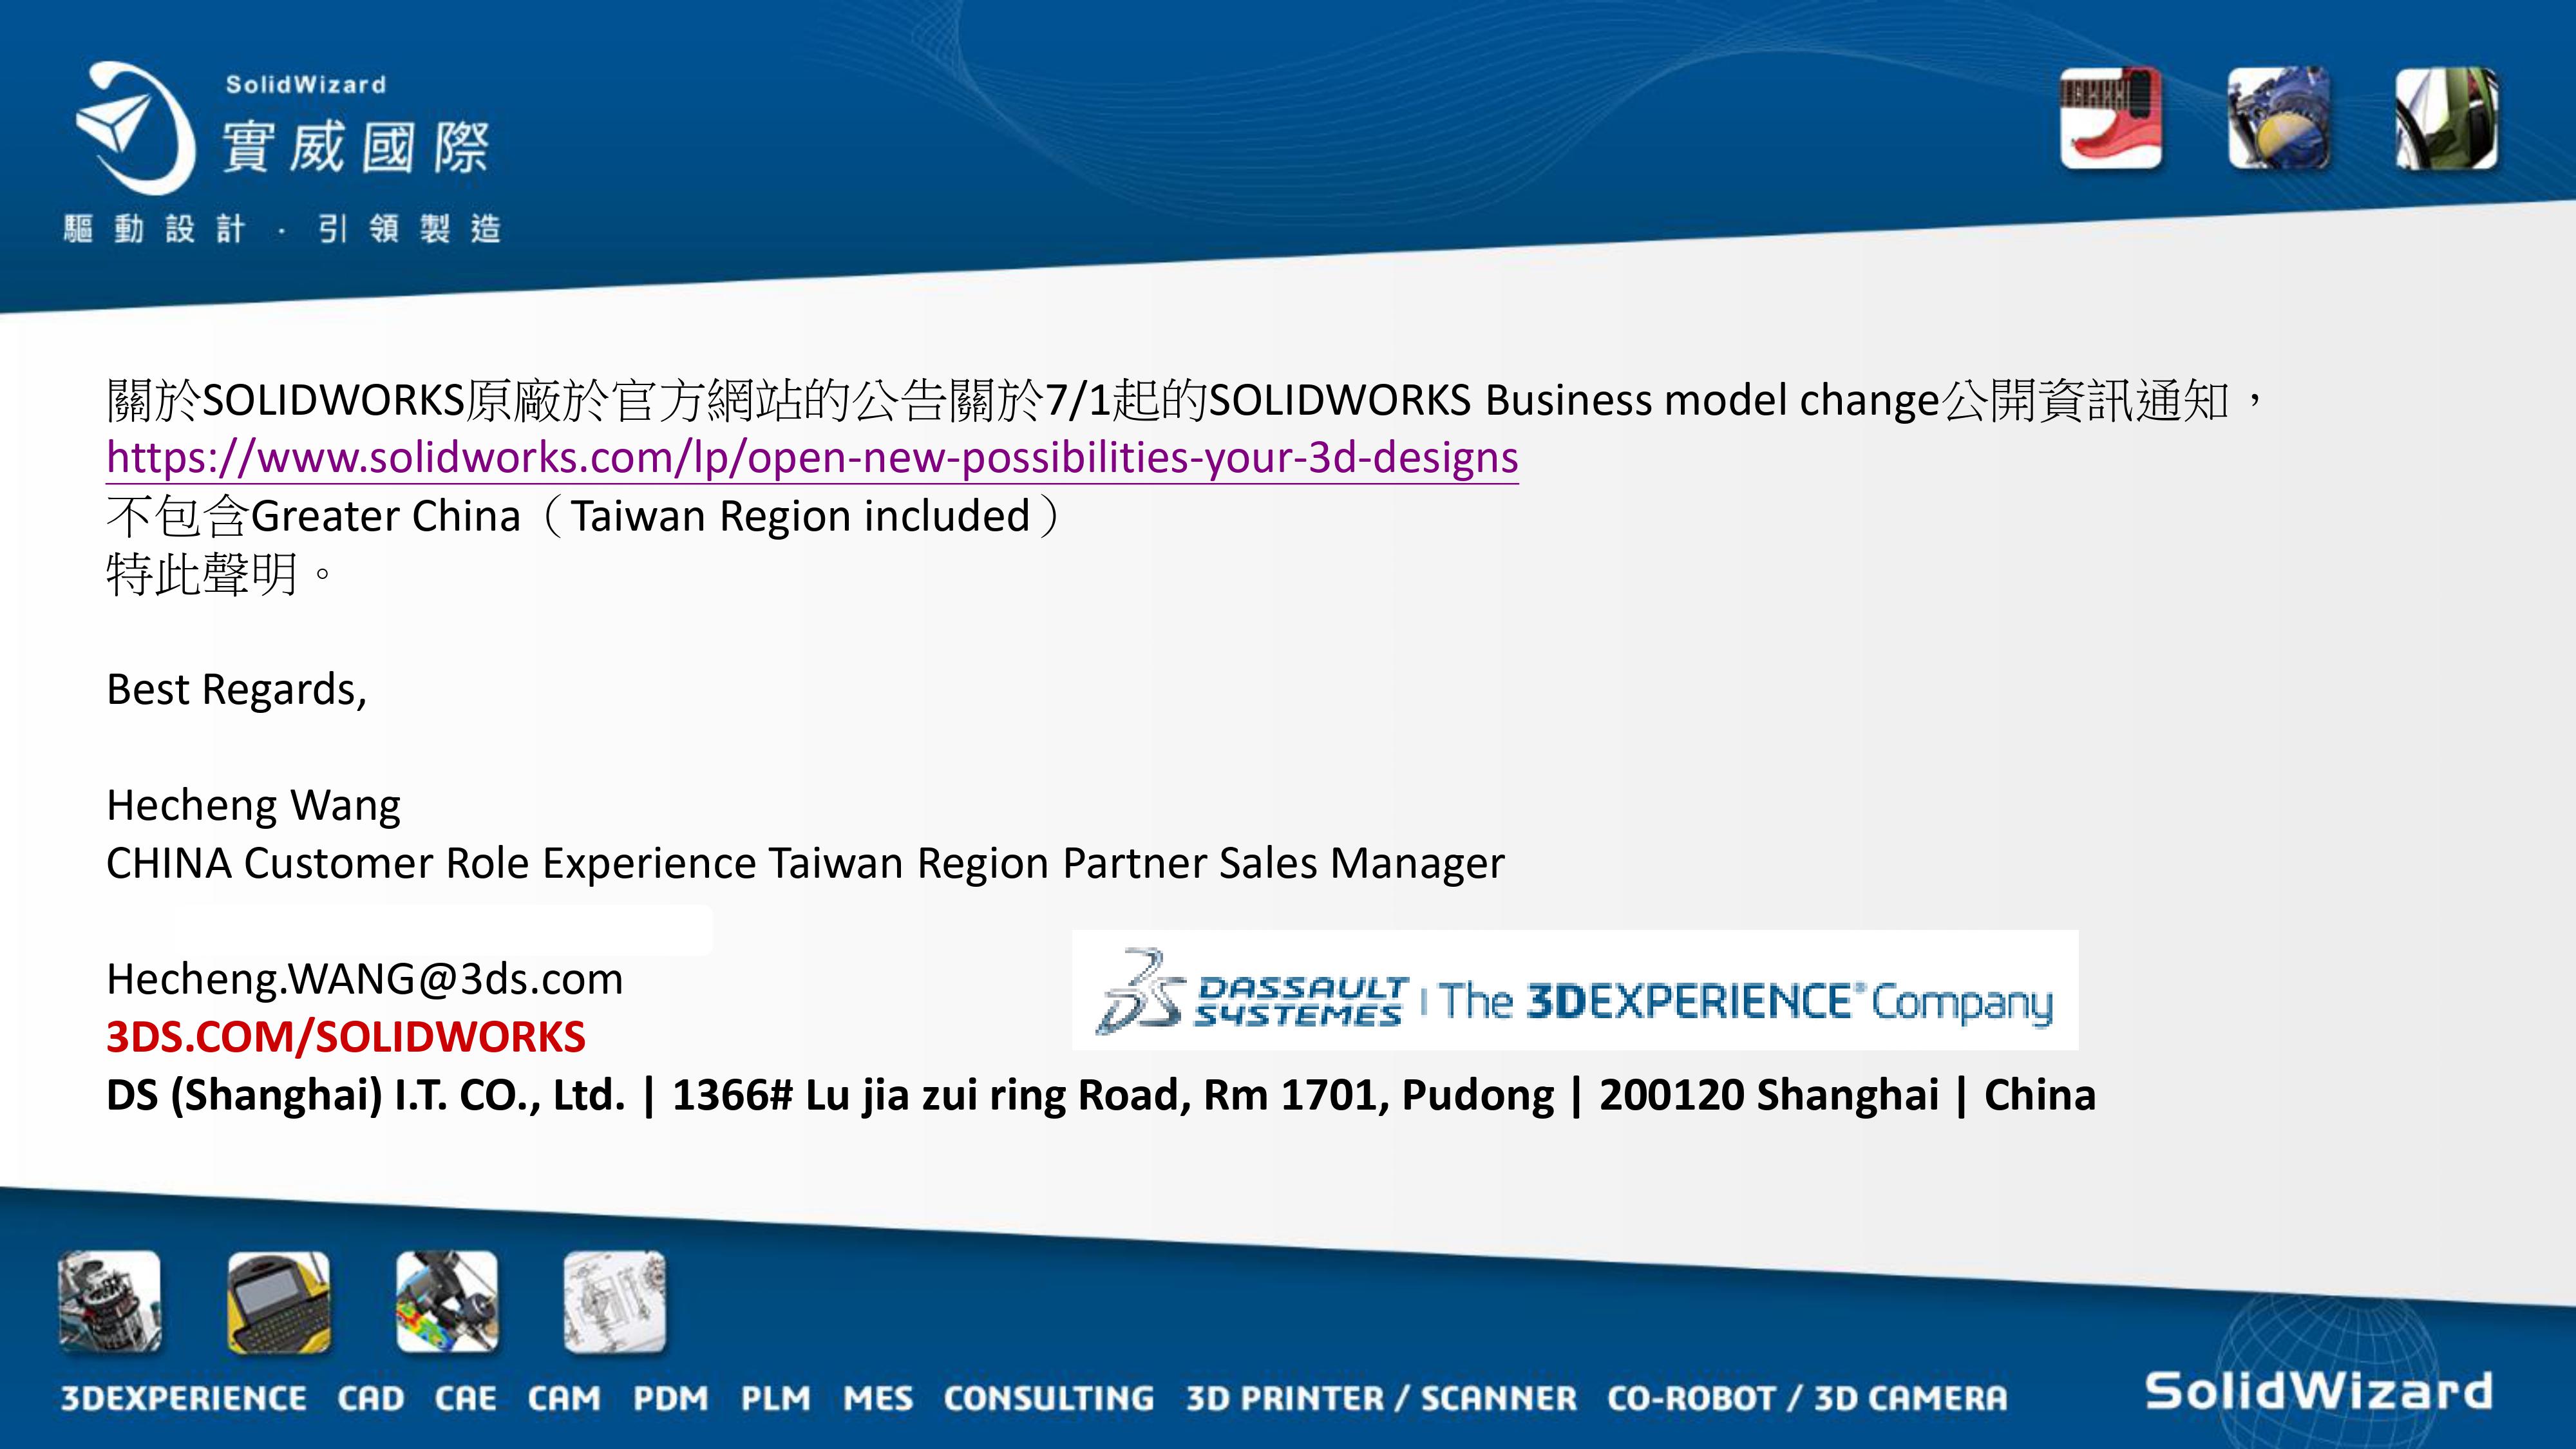 《SOLIDWORKS原廠公告》7/1起SOLIDWORKS Business model change公開資訊通知，不包含Greater China（Taiwan Region included）